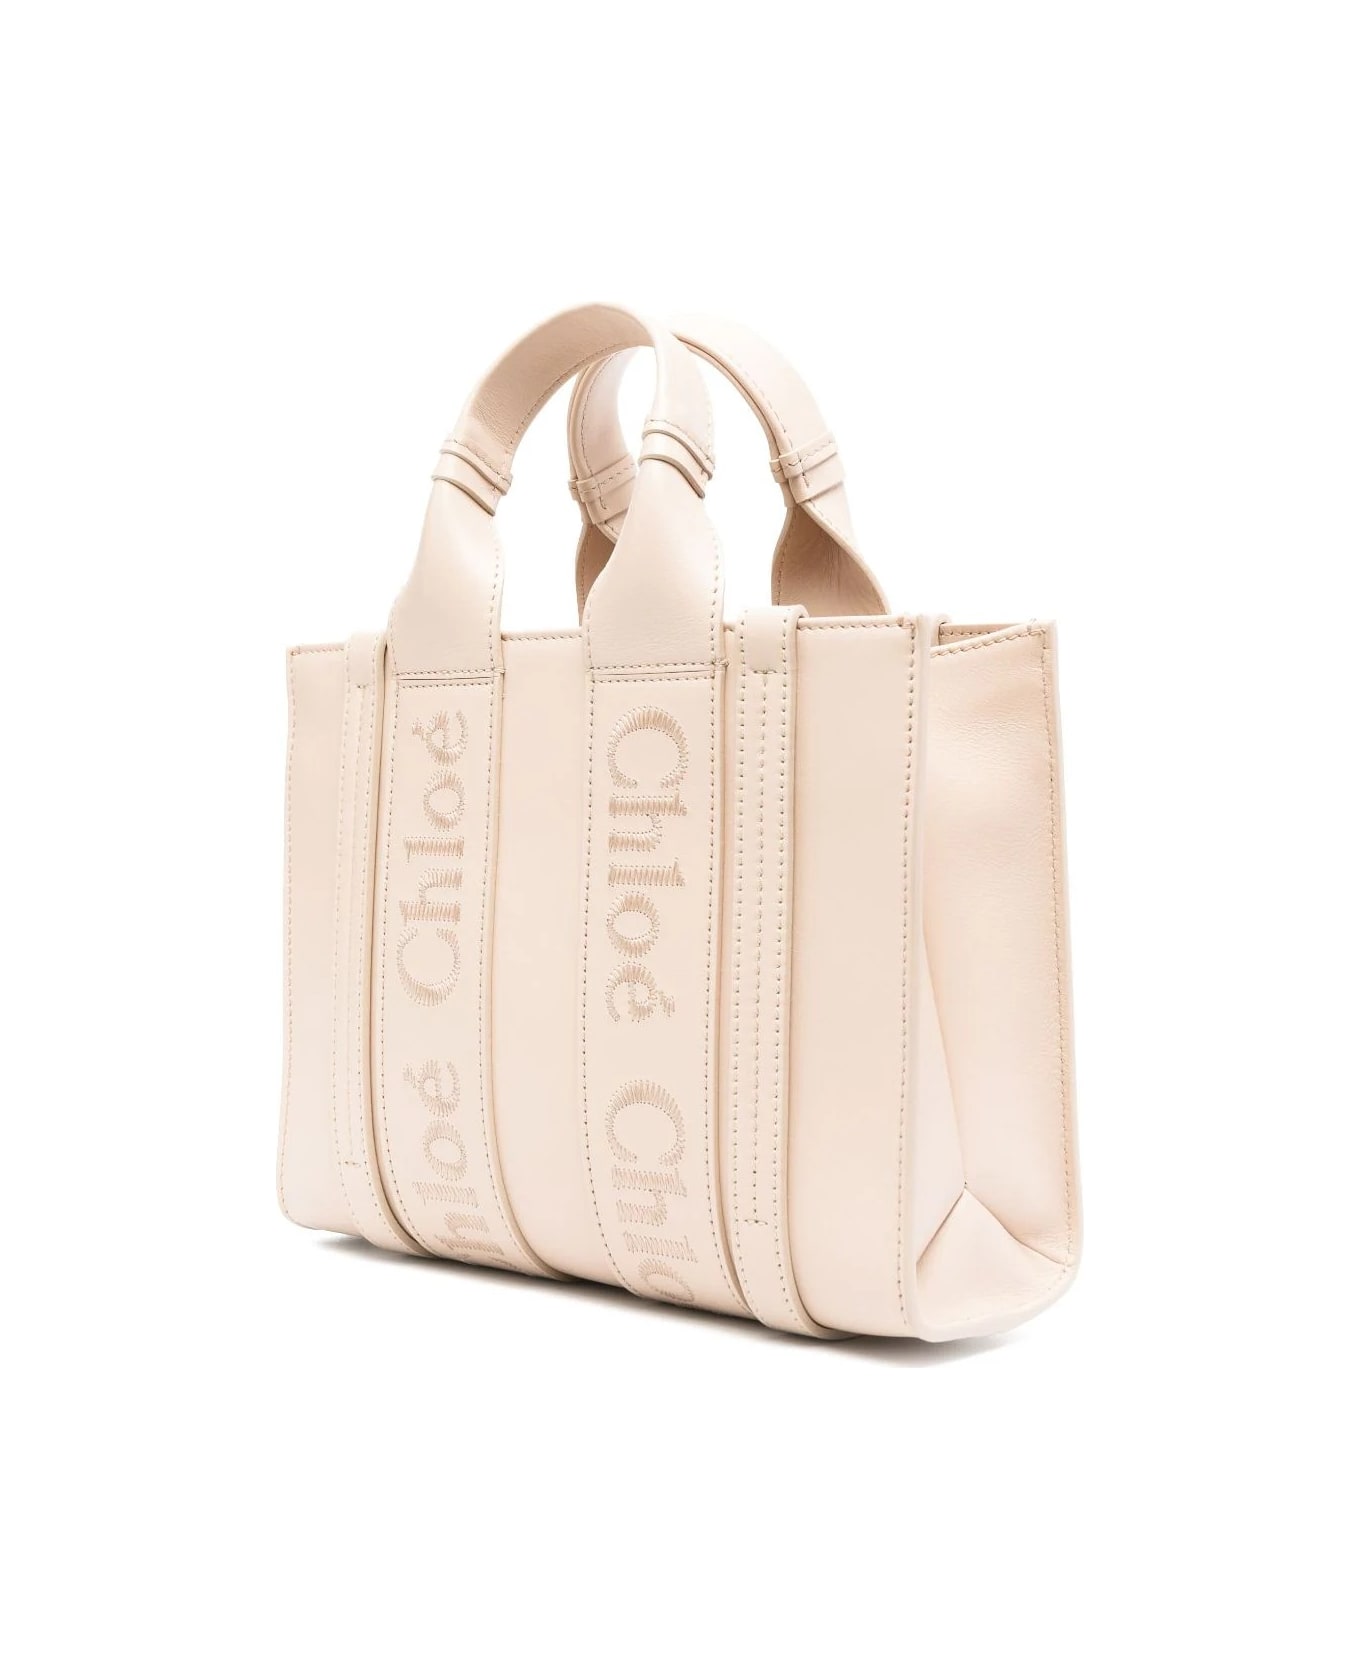 Chloé Woody Small Shopping Bag In Cement Pink Leather - Pink